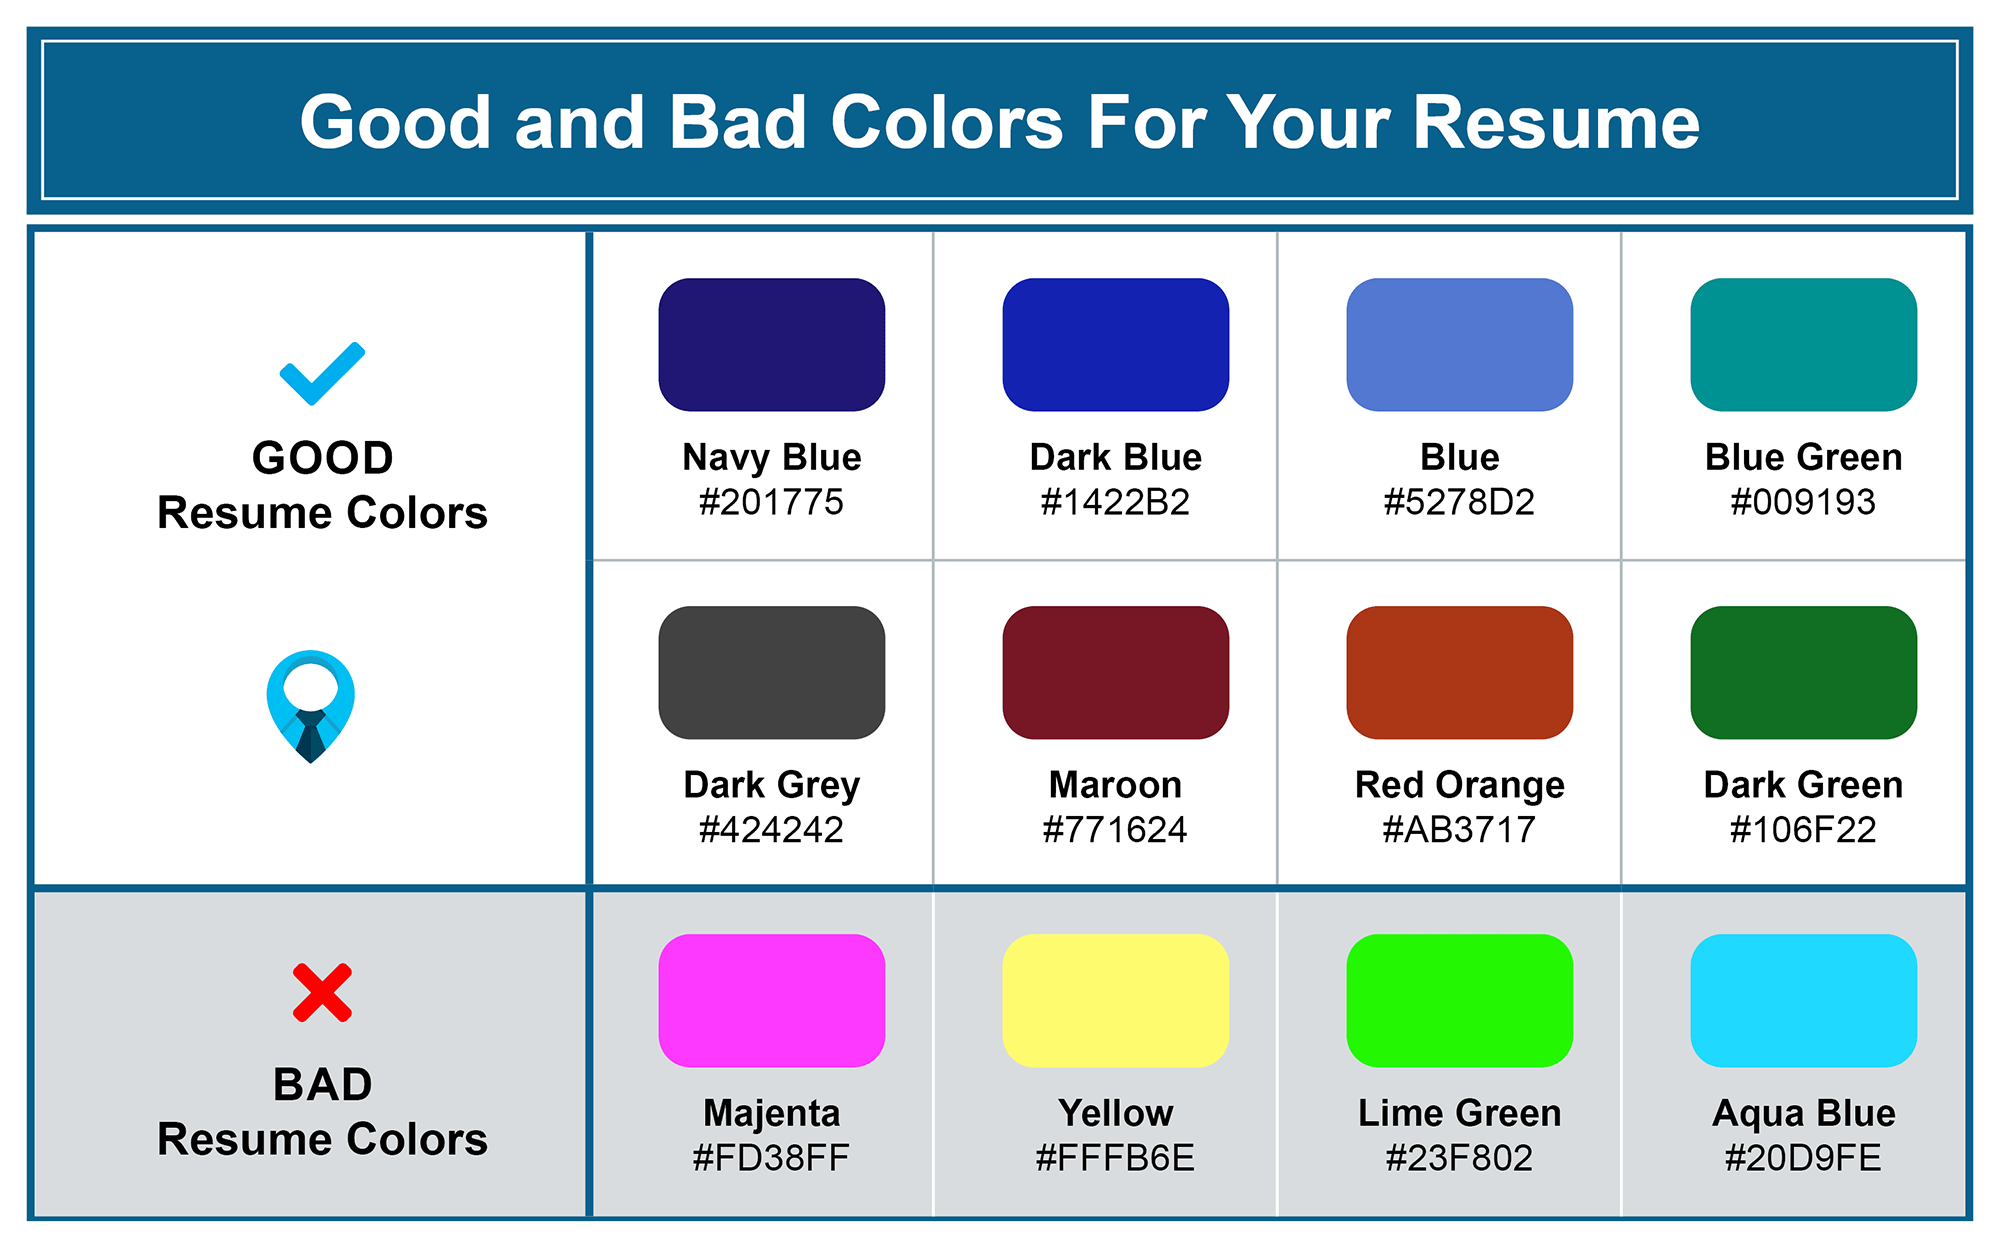 Good and Bad Colors For Your Resume